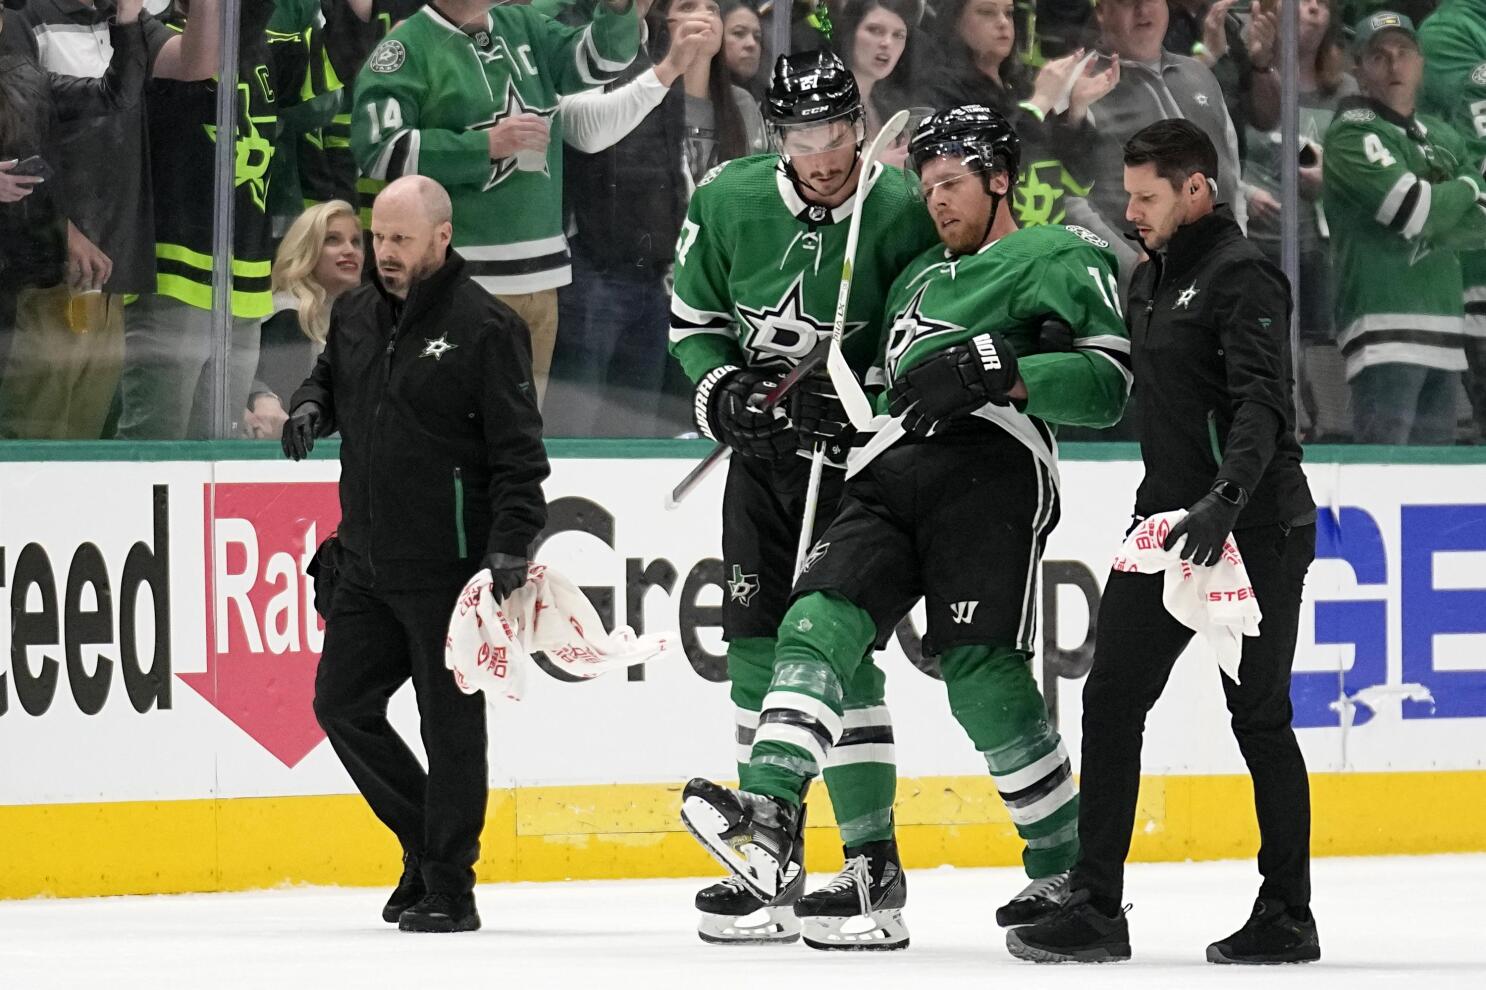 Joe Pavelski continues making history after leading Stars to Game 2 win